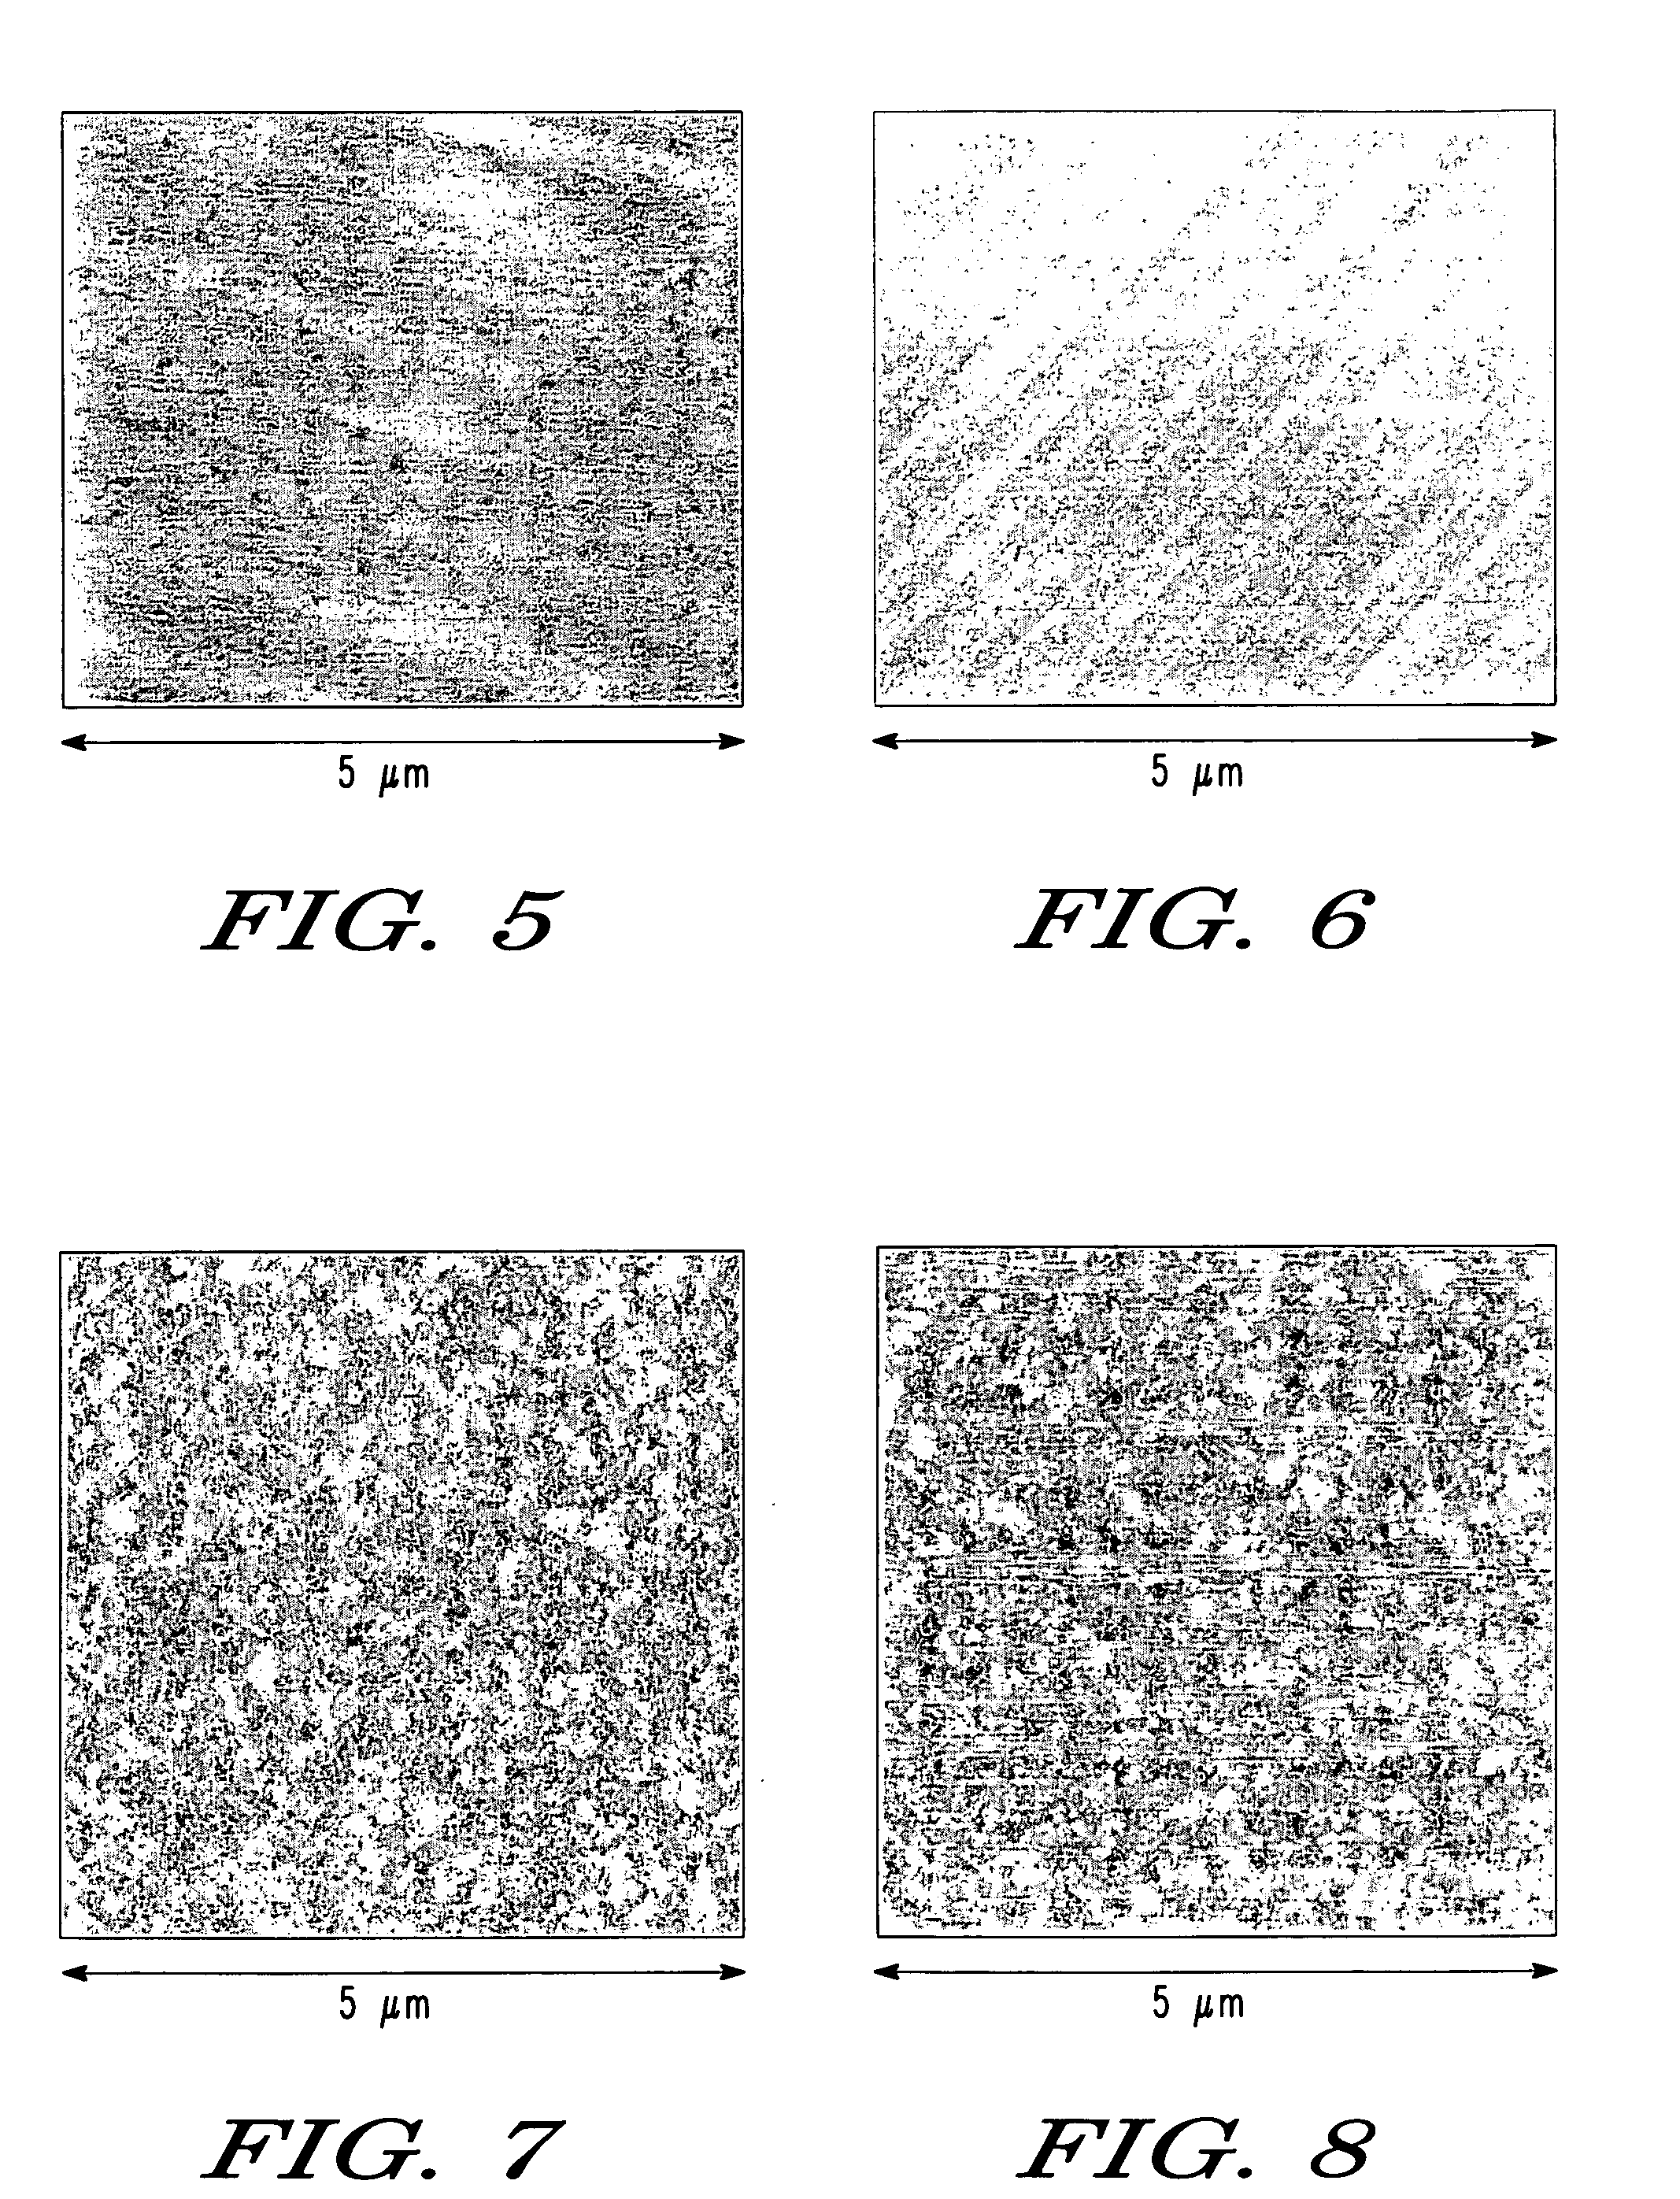 Method for preparing a semiconductor substrate surface for semiconductor device fabrication